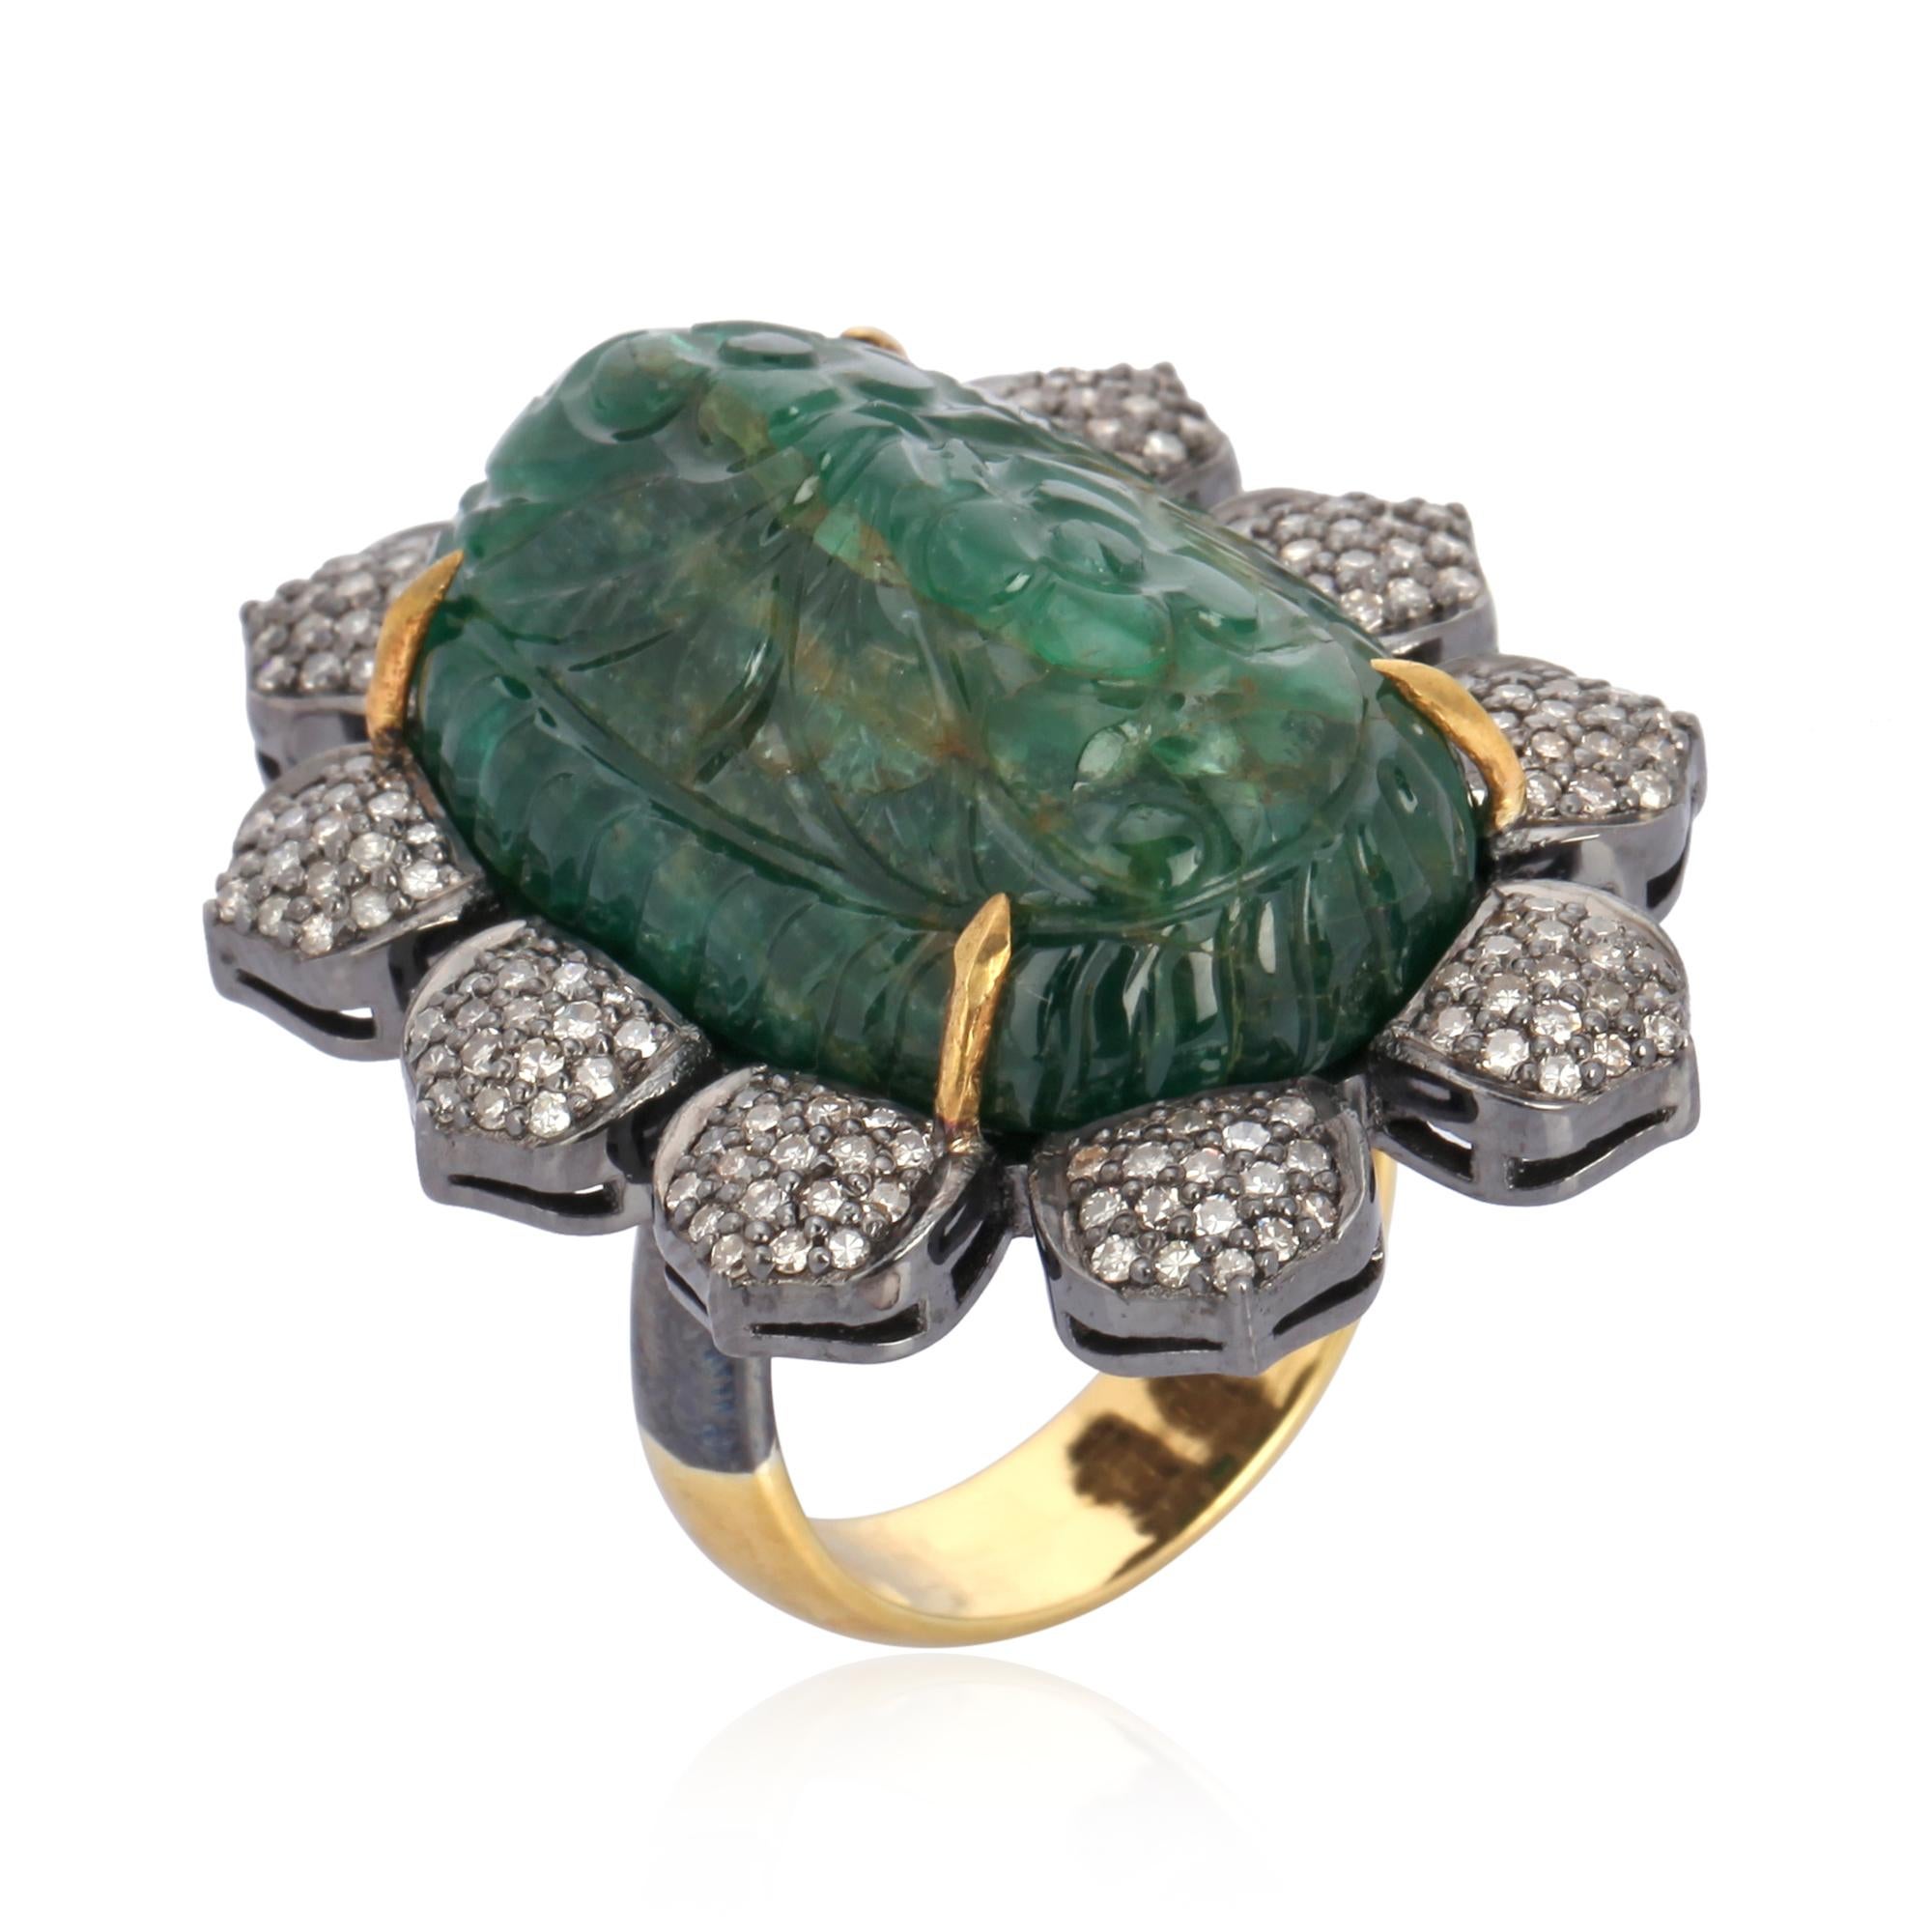 Contemporary 39.94 Carat Carved Emerald Diamond Cocktail Ring For Sale